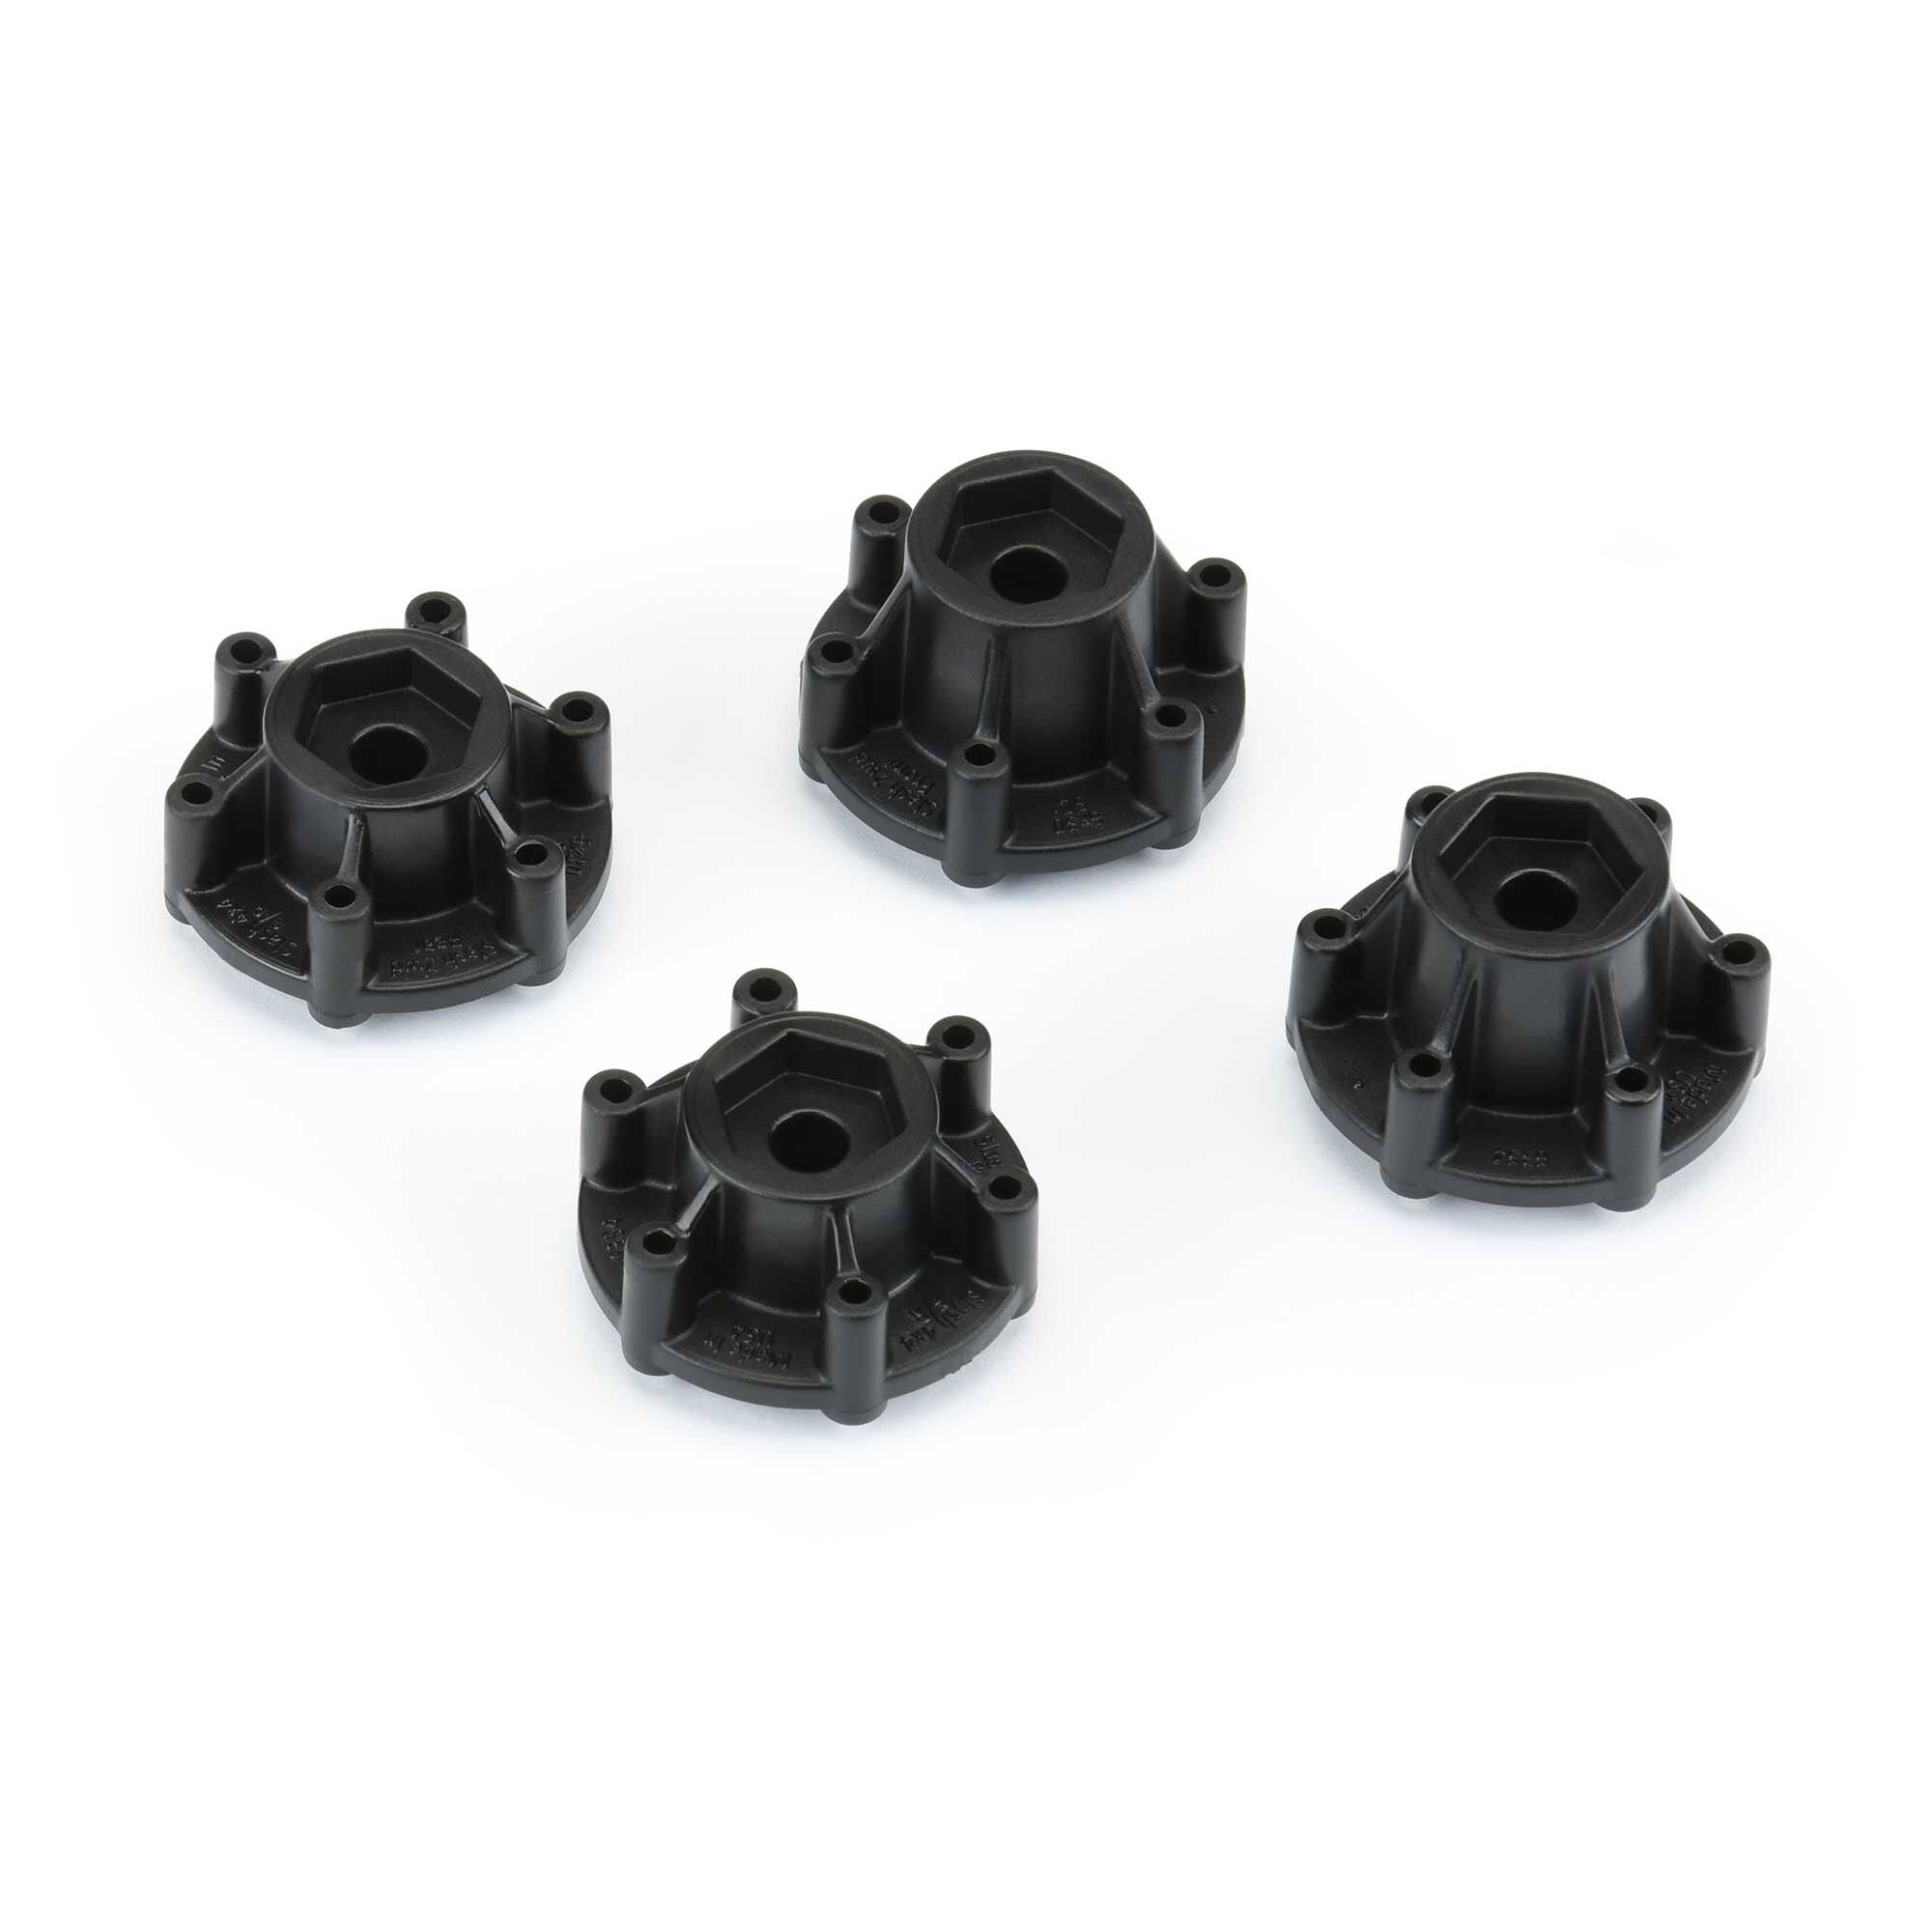 Pro Line 6x30 to 12mm SC Hex Adapters for 6x30 SC Wheels PRO635400